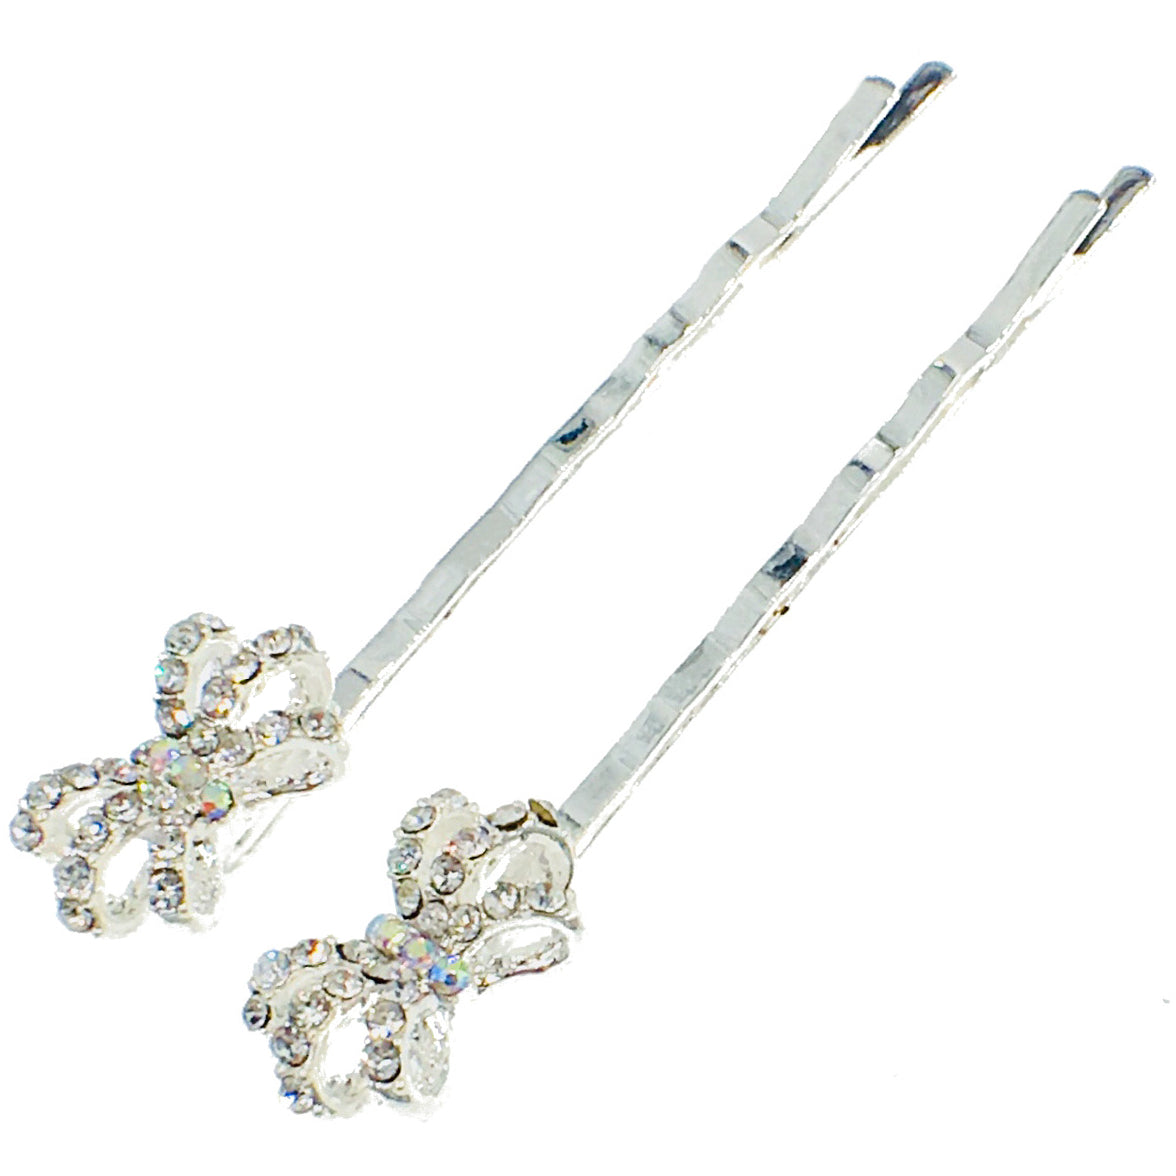 Buttercup Flower Bobby Pin Pair Rhinestone Crystal silver base Clear, Bobby Pin - MOGHANT